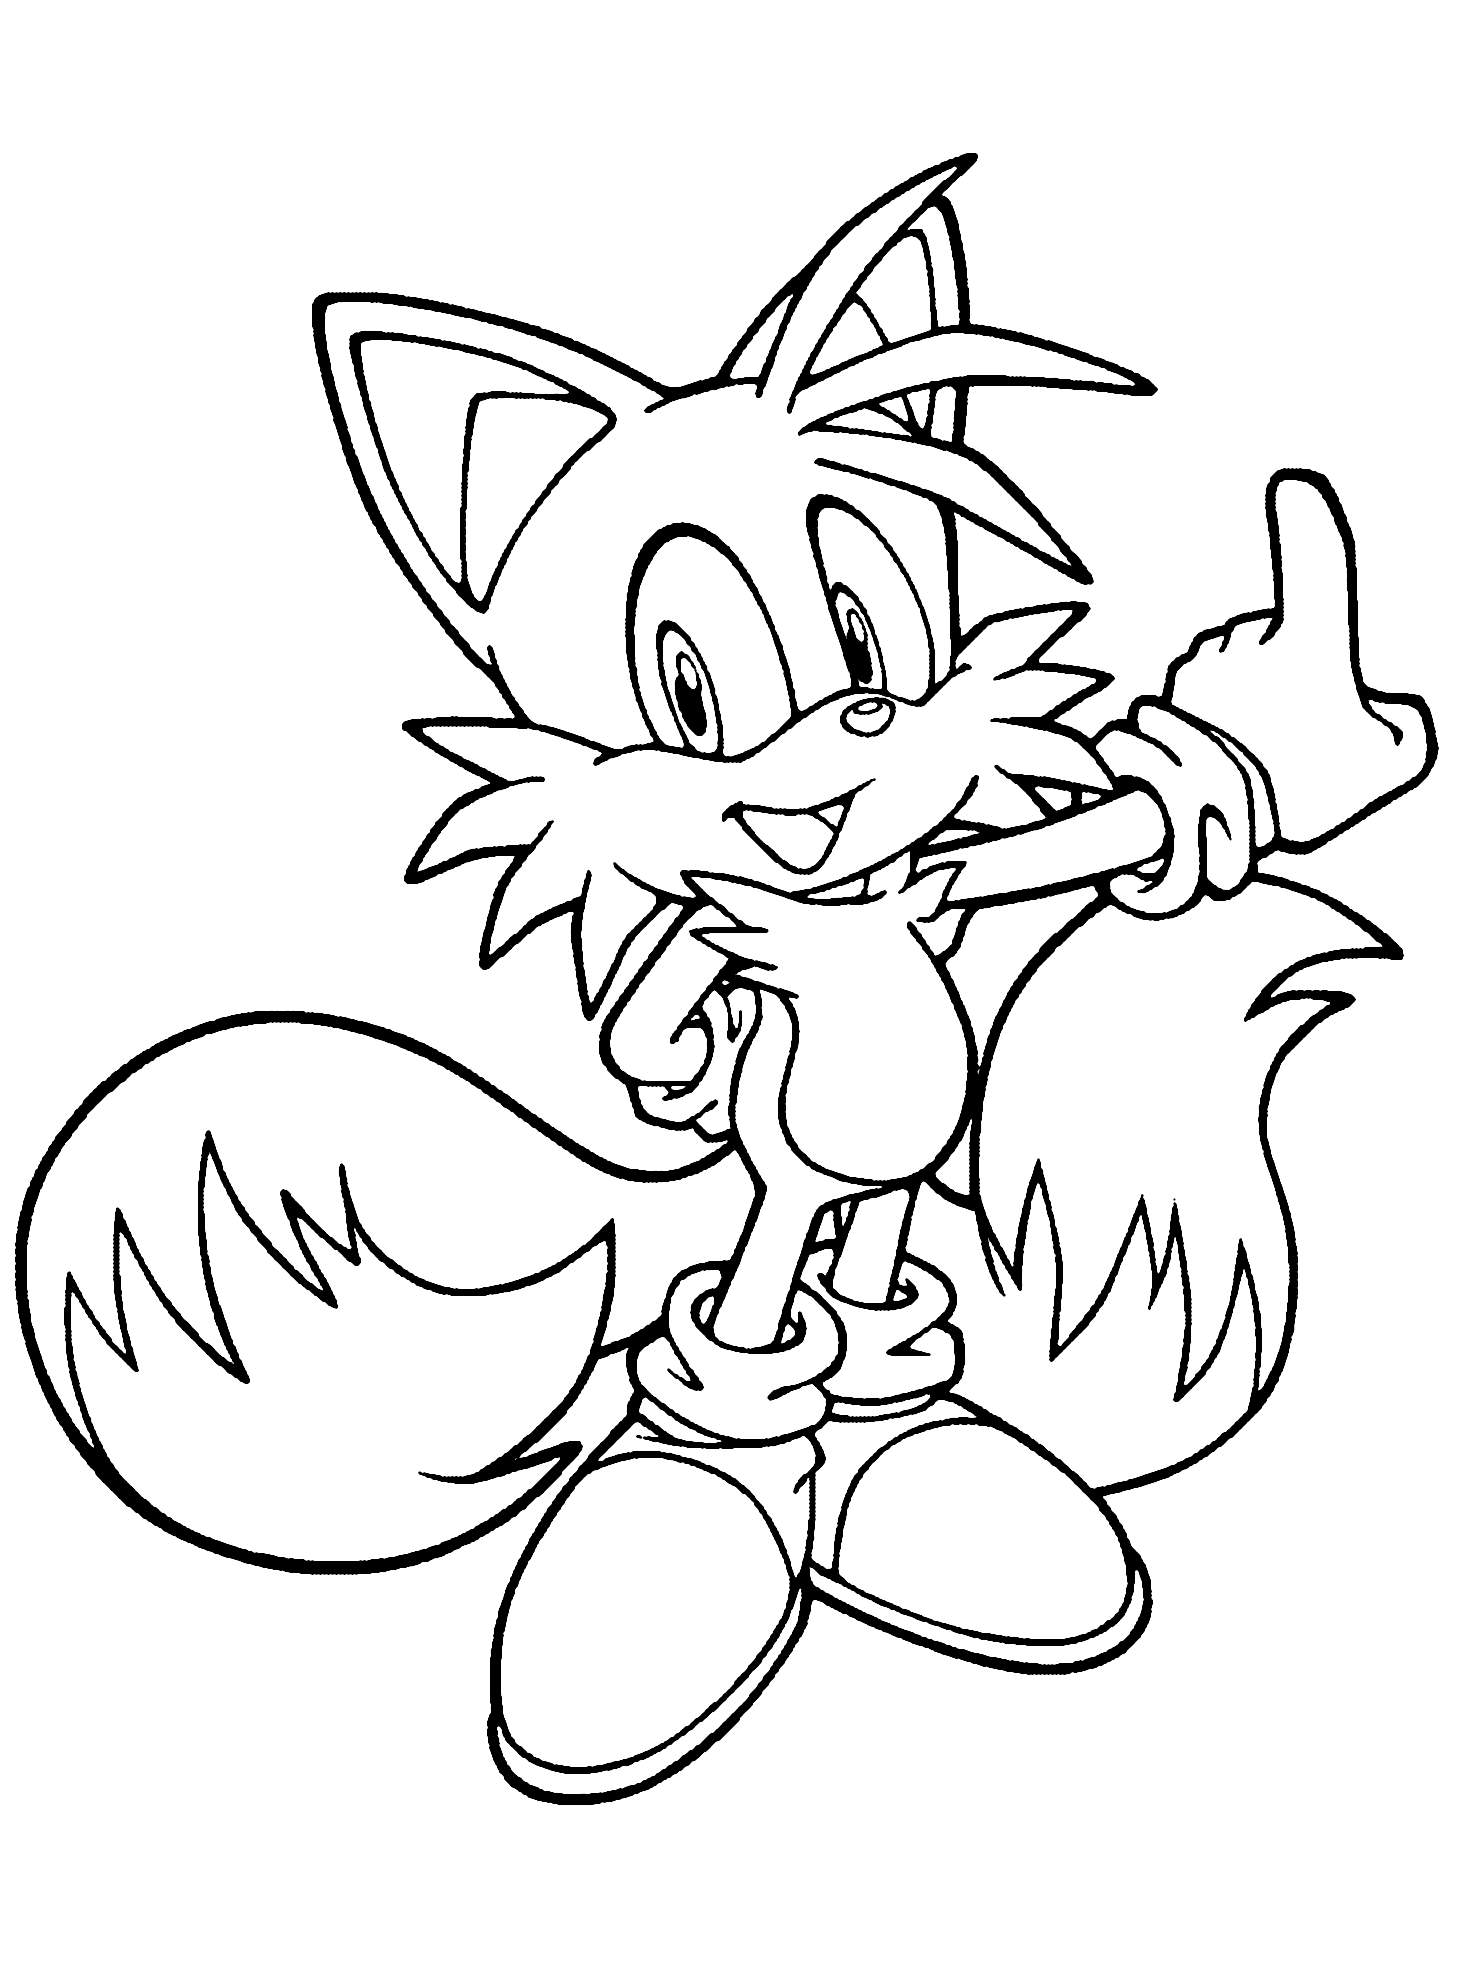 Tails Sonic coloring page